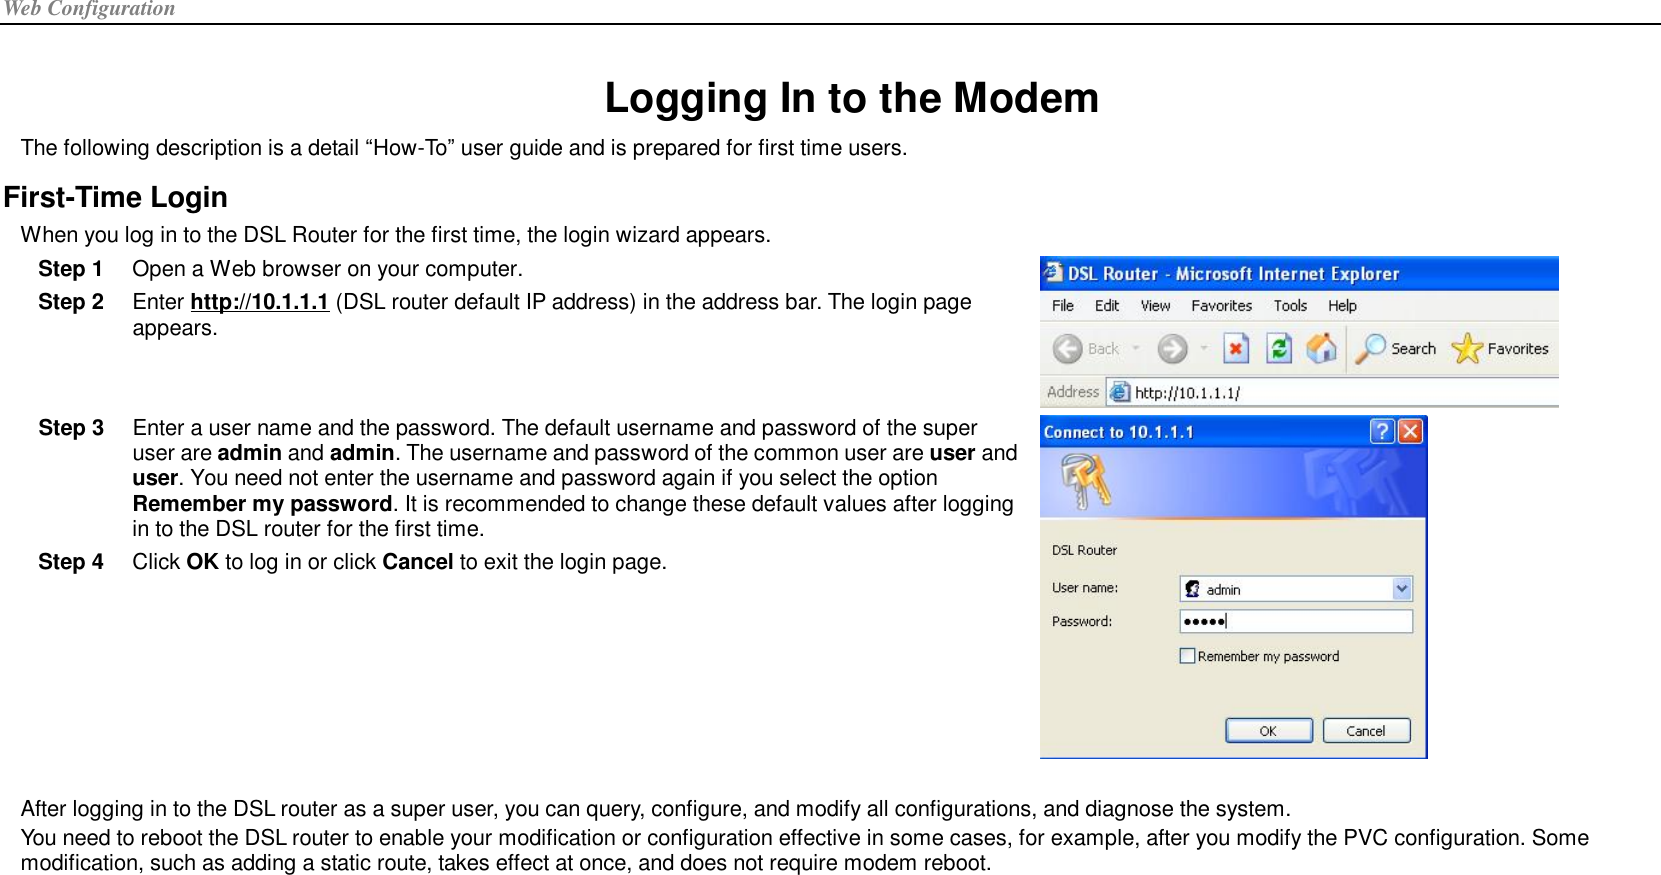 Web Configuration  Logging In to the Modem The following description is a detail “How-To” user guide and is prepared for first time users. First-Time Login When you log in to the DSL Router for the first time, the login wizard appears. Step 1  Open a Web browser on your computer. Step 2  Enter http://10.1.1.1 (DSL router default IP address) in the address bar. The login page appears.  Step 3  Enter a user name and the password. The default username and password of the super user are admin and admin. The username and password of the common user are user and user. You need not enter the username and password again if you select the option Remember my password. It is recommended to change these default values after logging in to the DSL router for the first time. Step 4  Click OK to log in or click Cancel to exit the login page.   After logging in to the DSL router as a super user, you can query, configure, and modify all configurations, and diagnose the system. You need to reboot the DSL router to enable your modification or configuration effective in some cases, for example, after you modify the PVC configuration. Some modification, such as adding a static route, takes effect at once, and does not require modem reboot.  